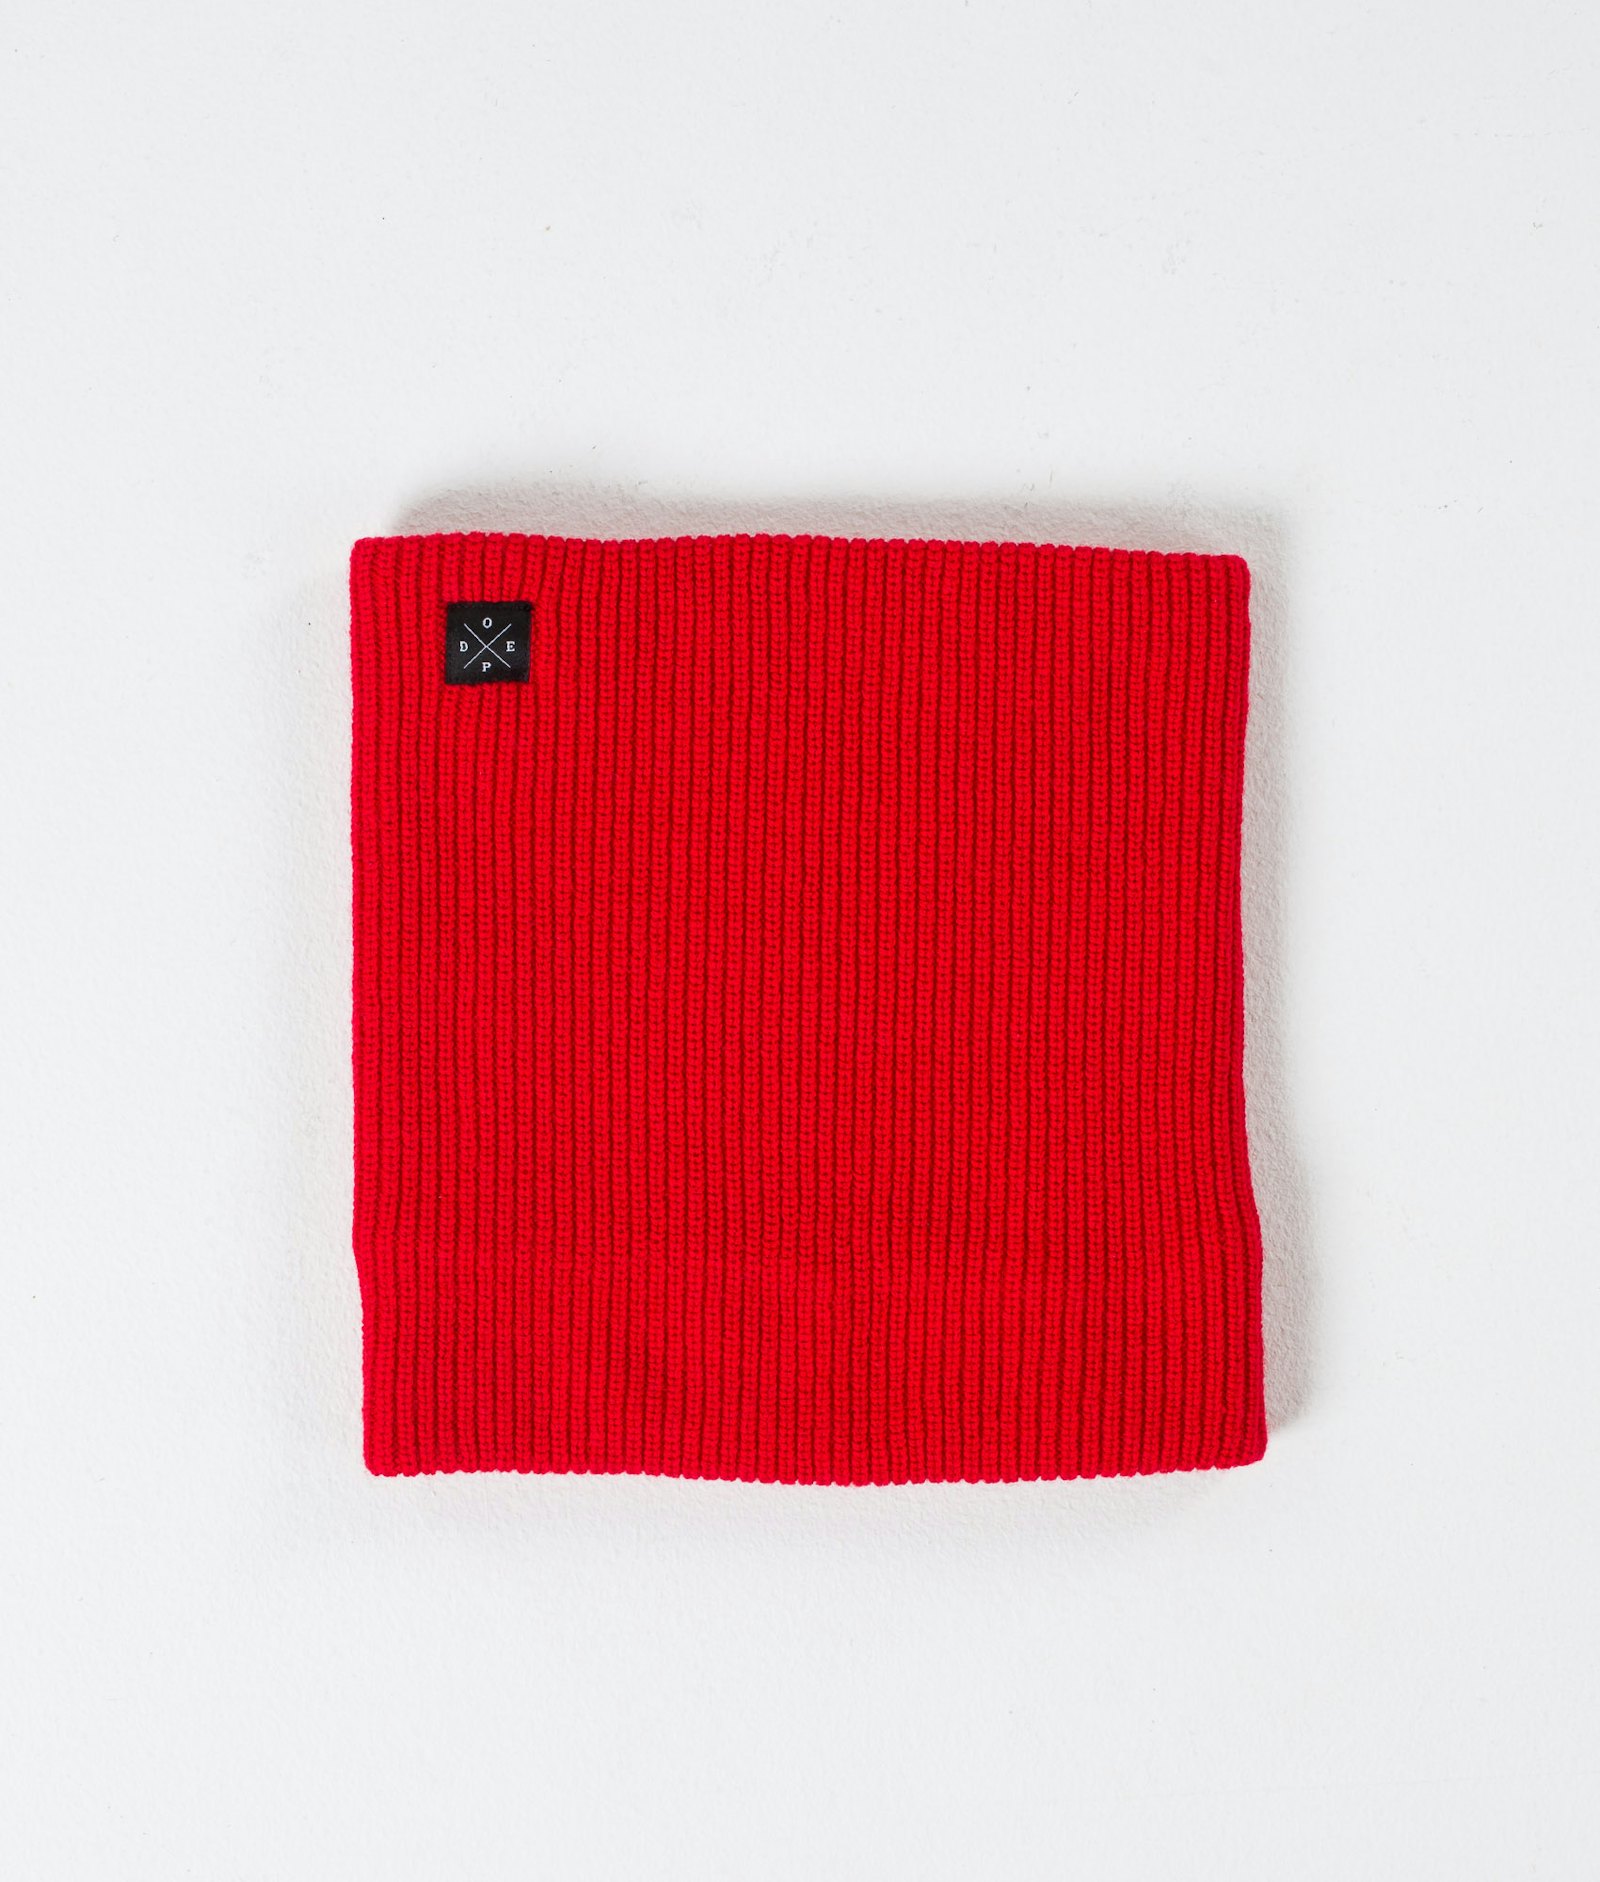 2X-UP Knitted Skimasker Red